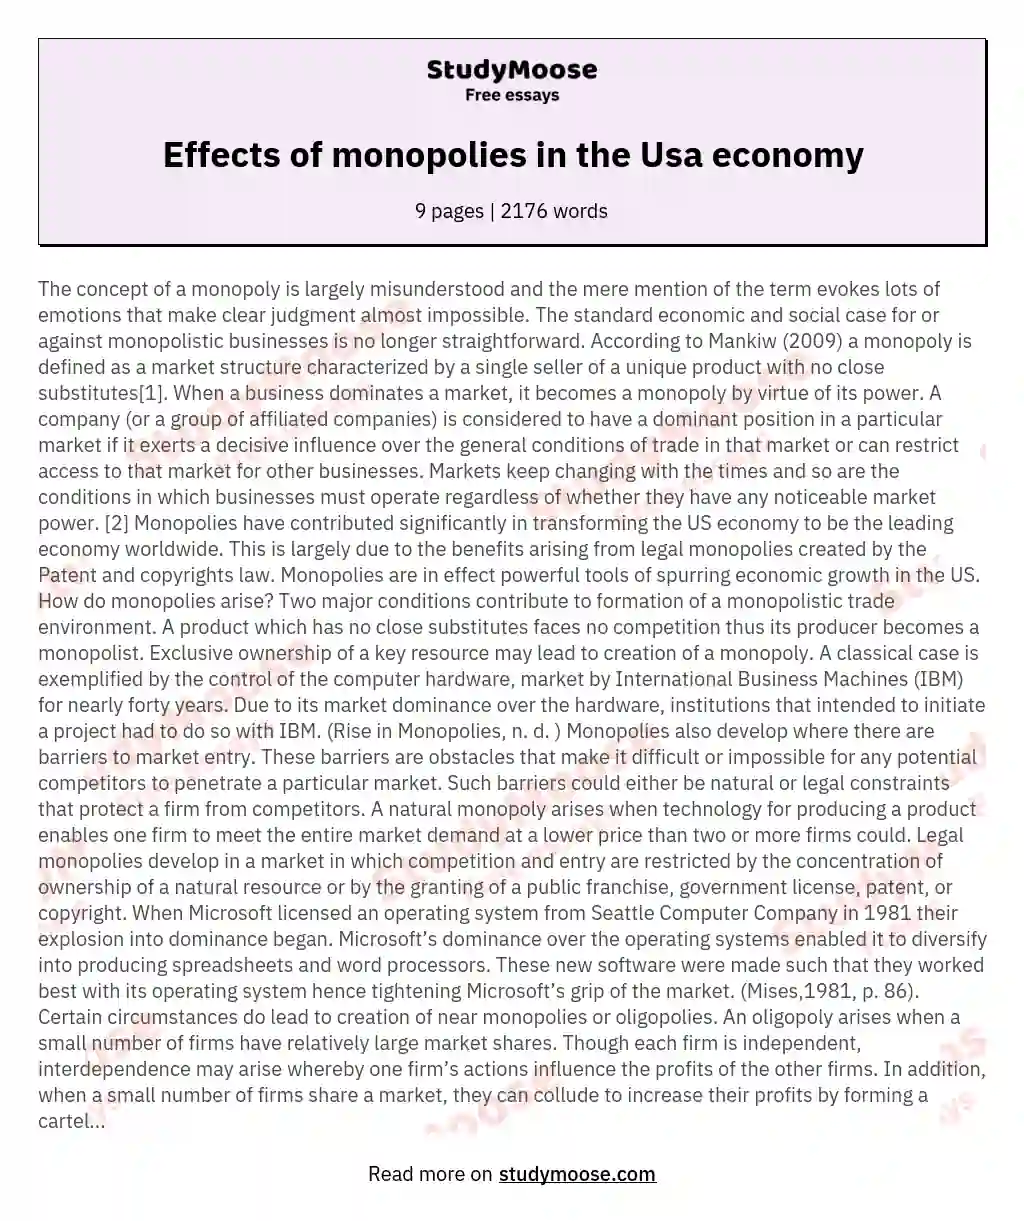 Effects of monopolies in the Usa economy essay